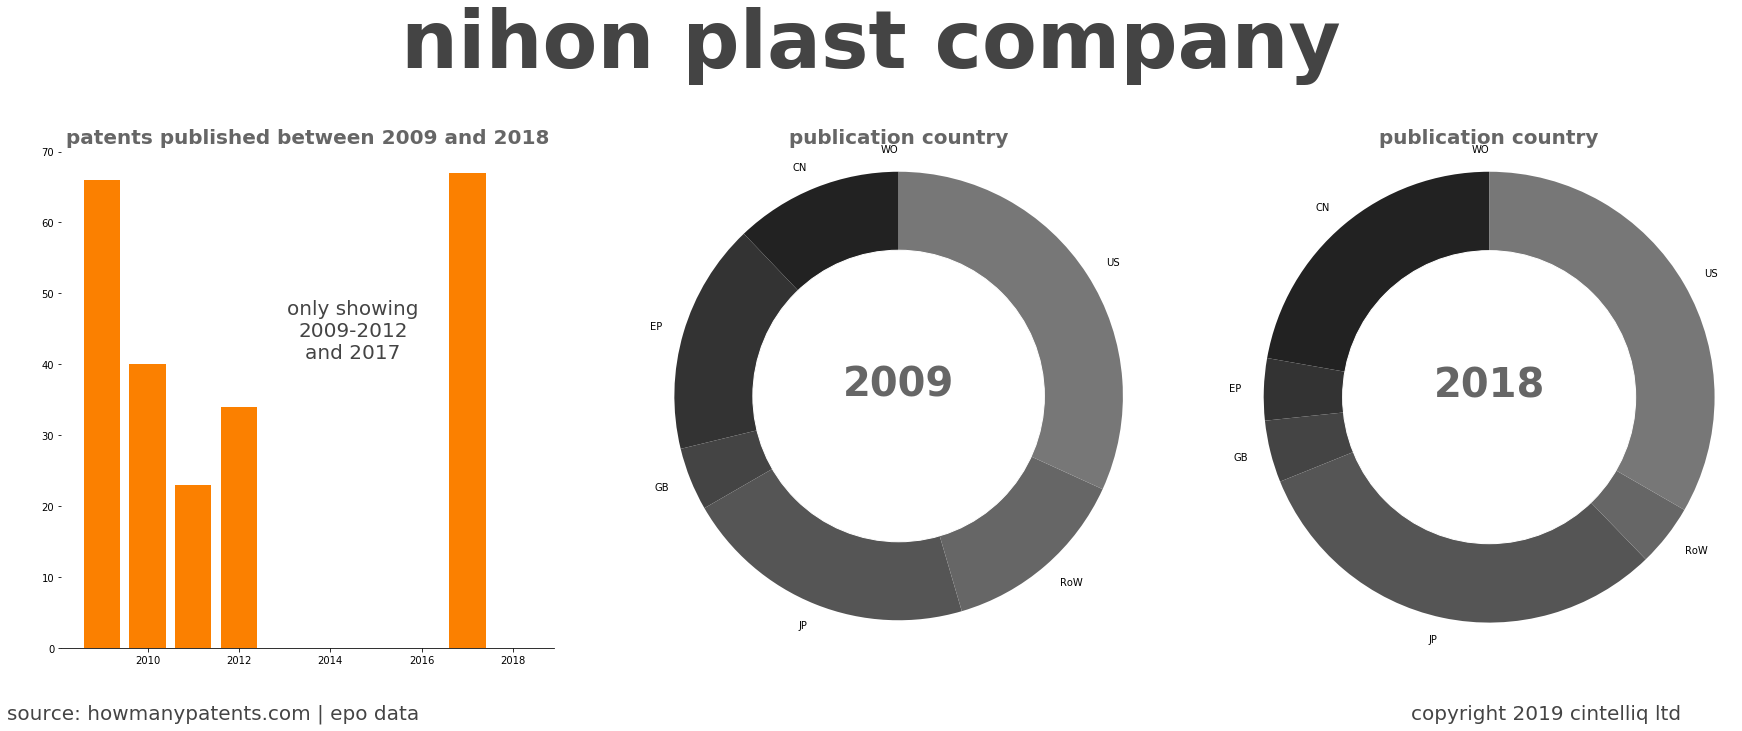 summary of patents for Nihon Plast Company